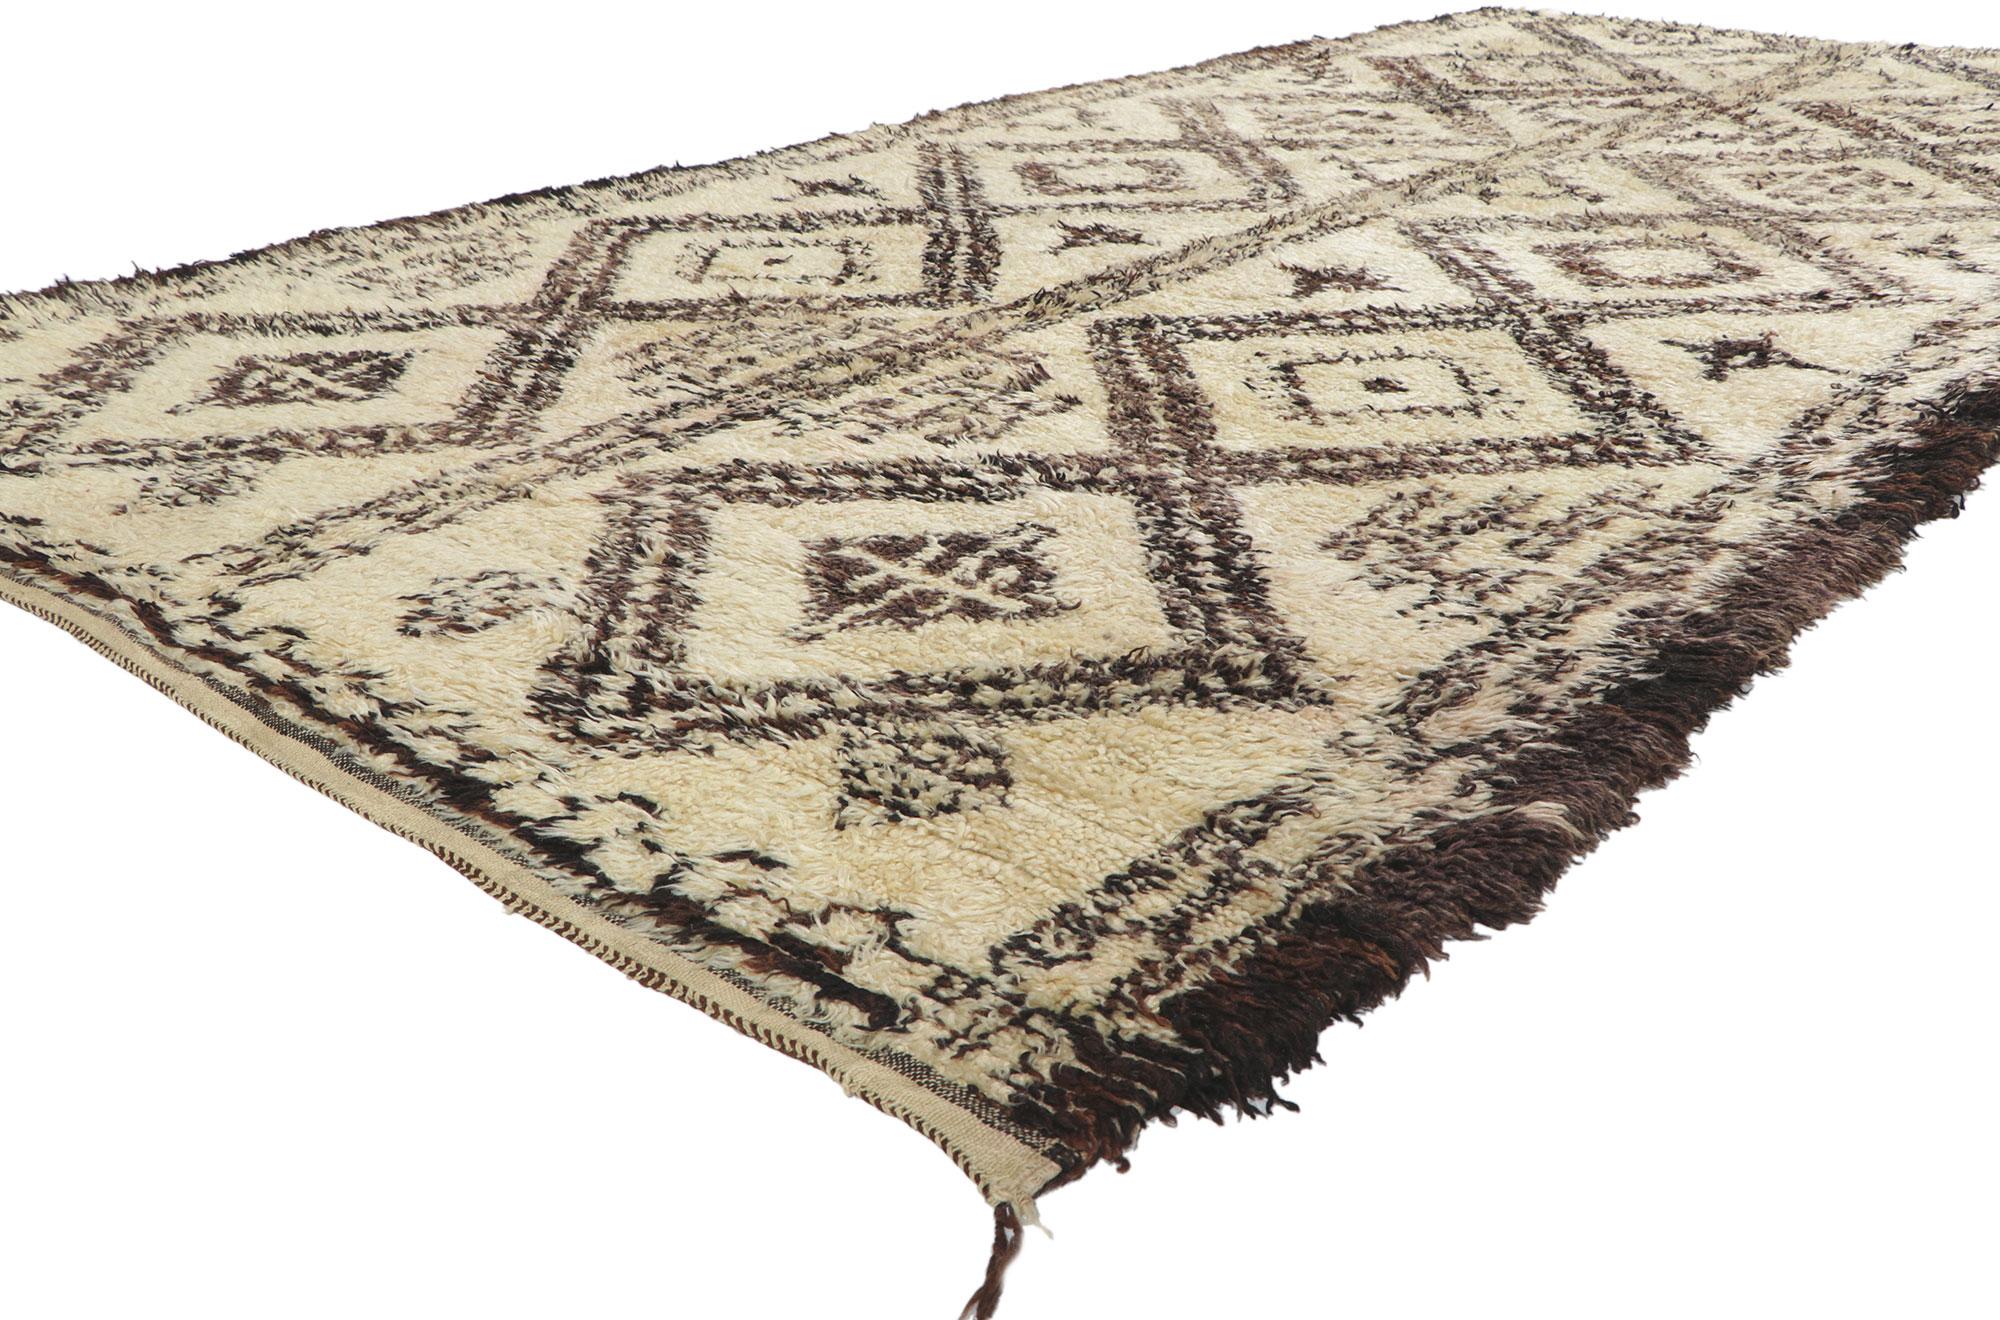 78387 Vintage Moroccan Beni Ourain rug, 06'00 x 12'09. With its simplicity, plush pile, incredible detail and texture, this hand knotted wool vintage Beni Ourain Moroccan rug is a captivating vision of woven beauty. The eye-catching diamond trellis